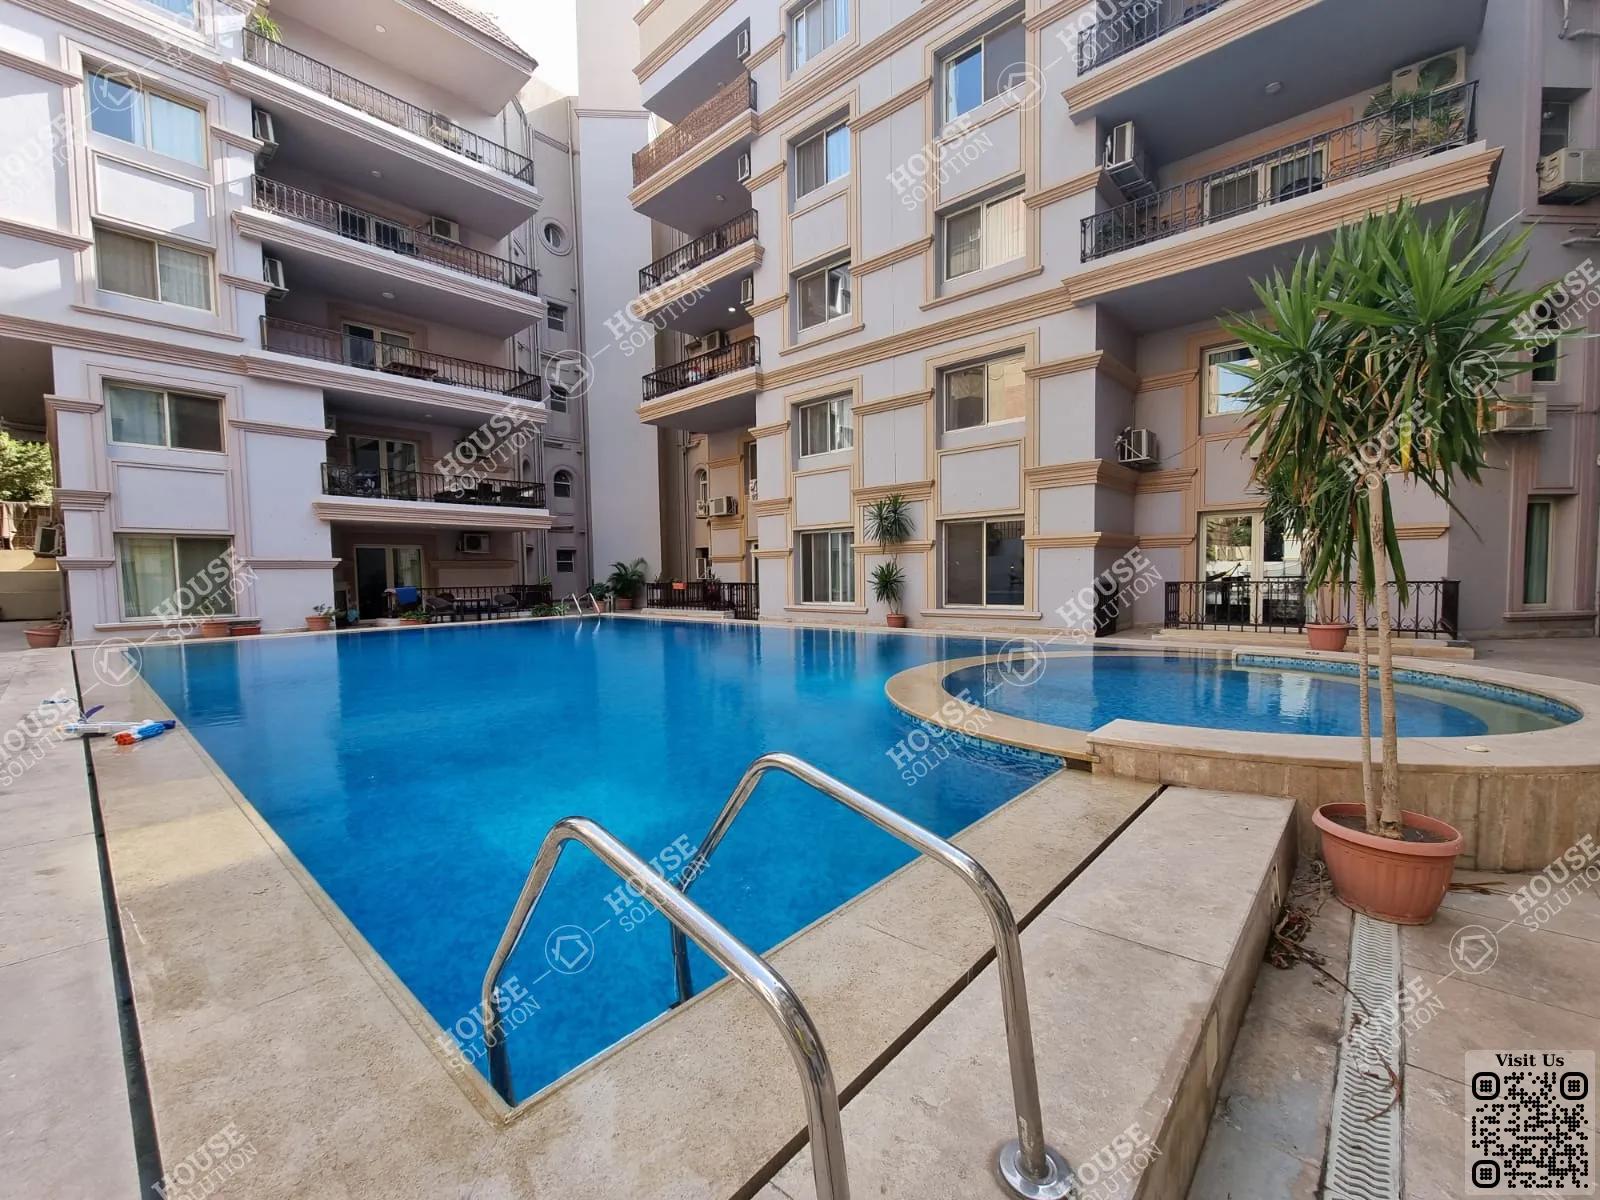 SHARED SWIMMING POOL  @ Apartments For Rent In Maadi Maadi Sarayat Area: 280 m² consists of 3 Bedrooms 3 Bathrooms Modern furnished 5 stars #5163-2